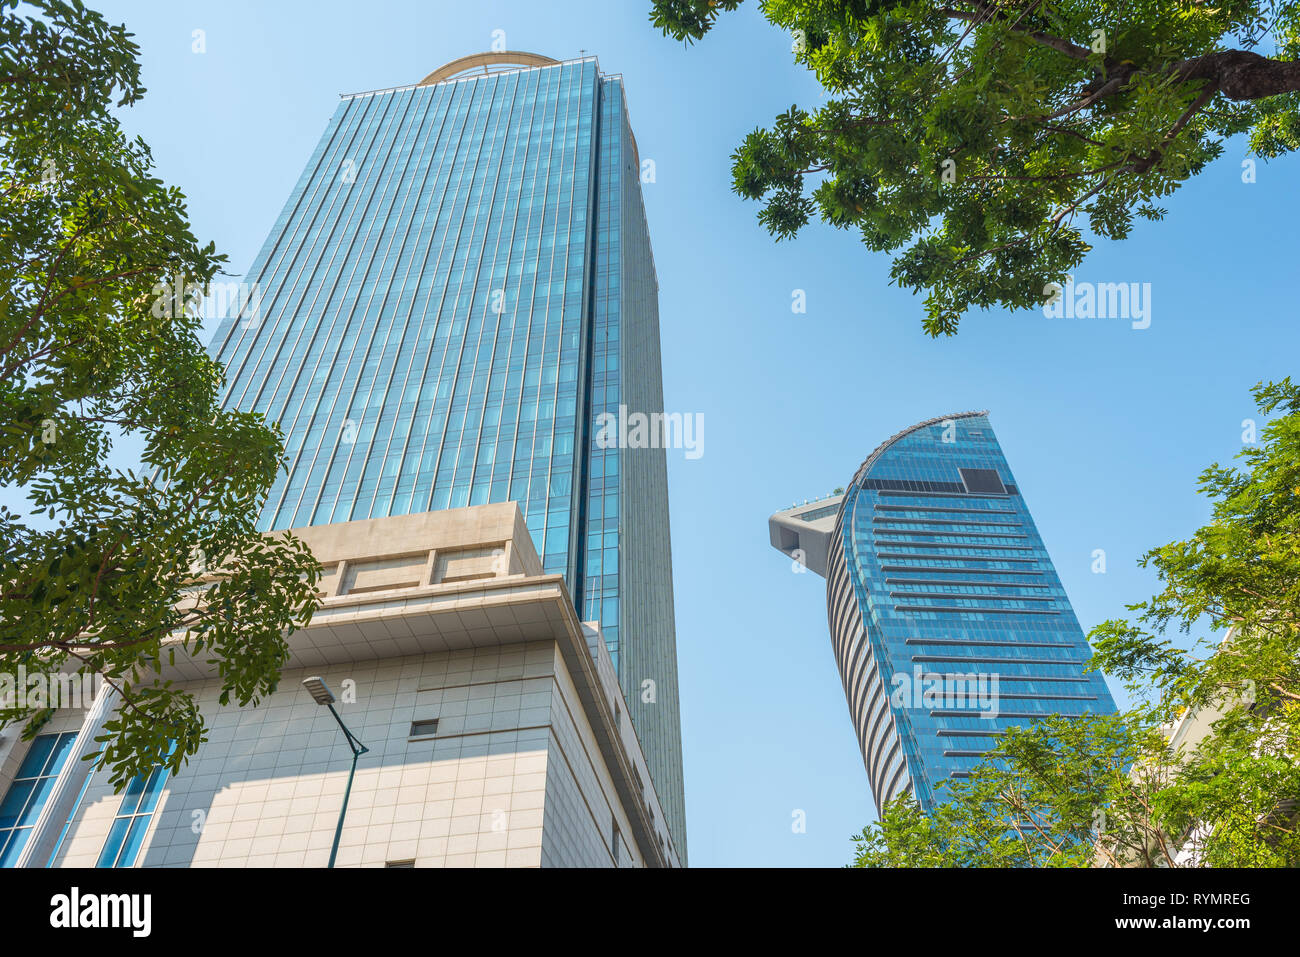 Phnom Penh, Cambodia - January 25, 2019: the downtown's high-rise Canadia Tower & Vattanac Capital Tower, the 2nd tallest skyscraper in Cambodia. Stock Photo